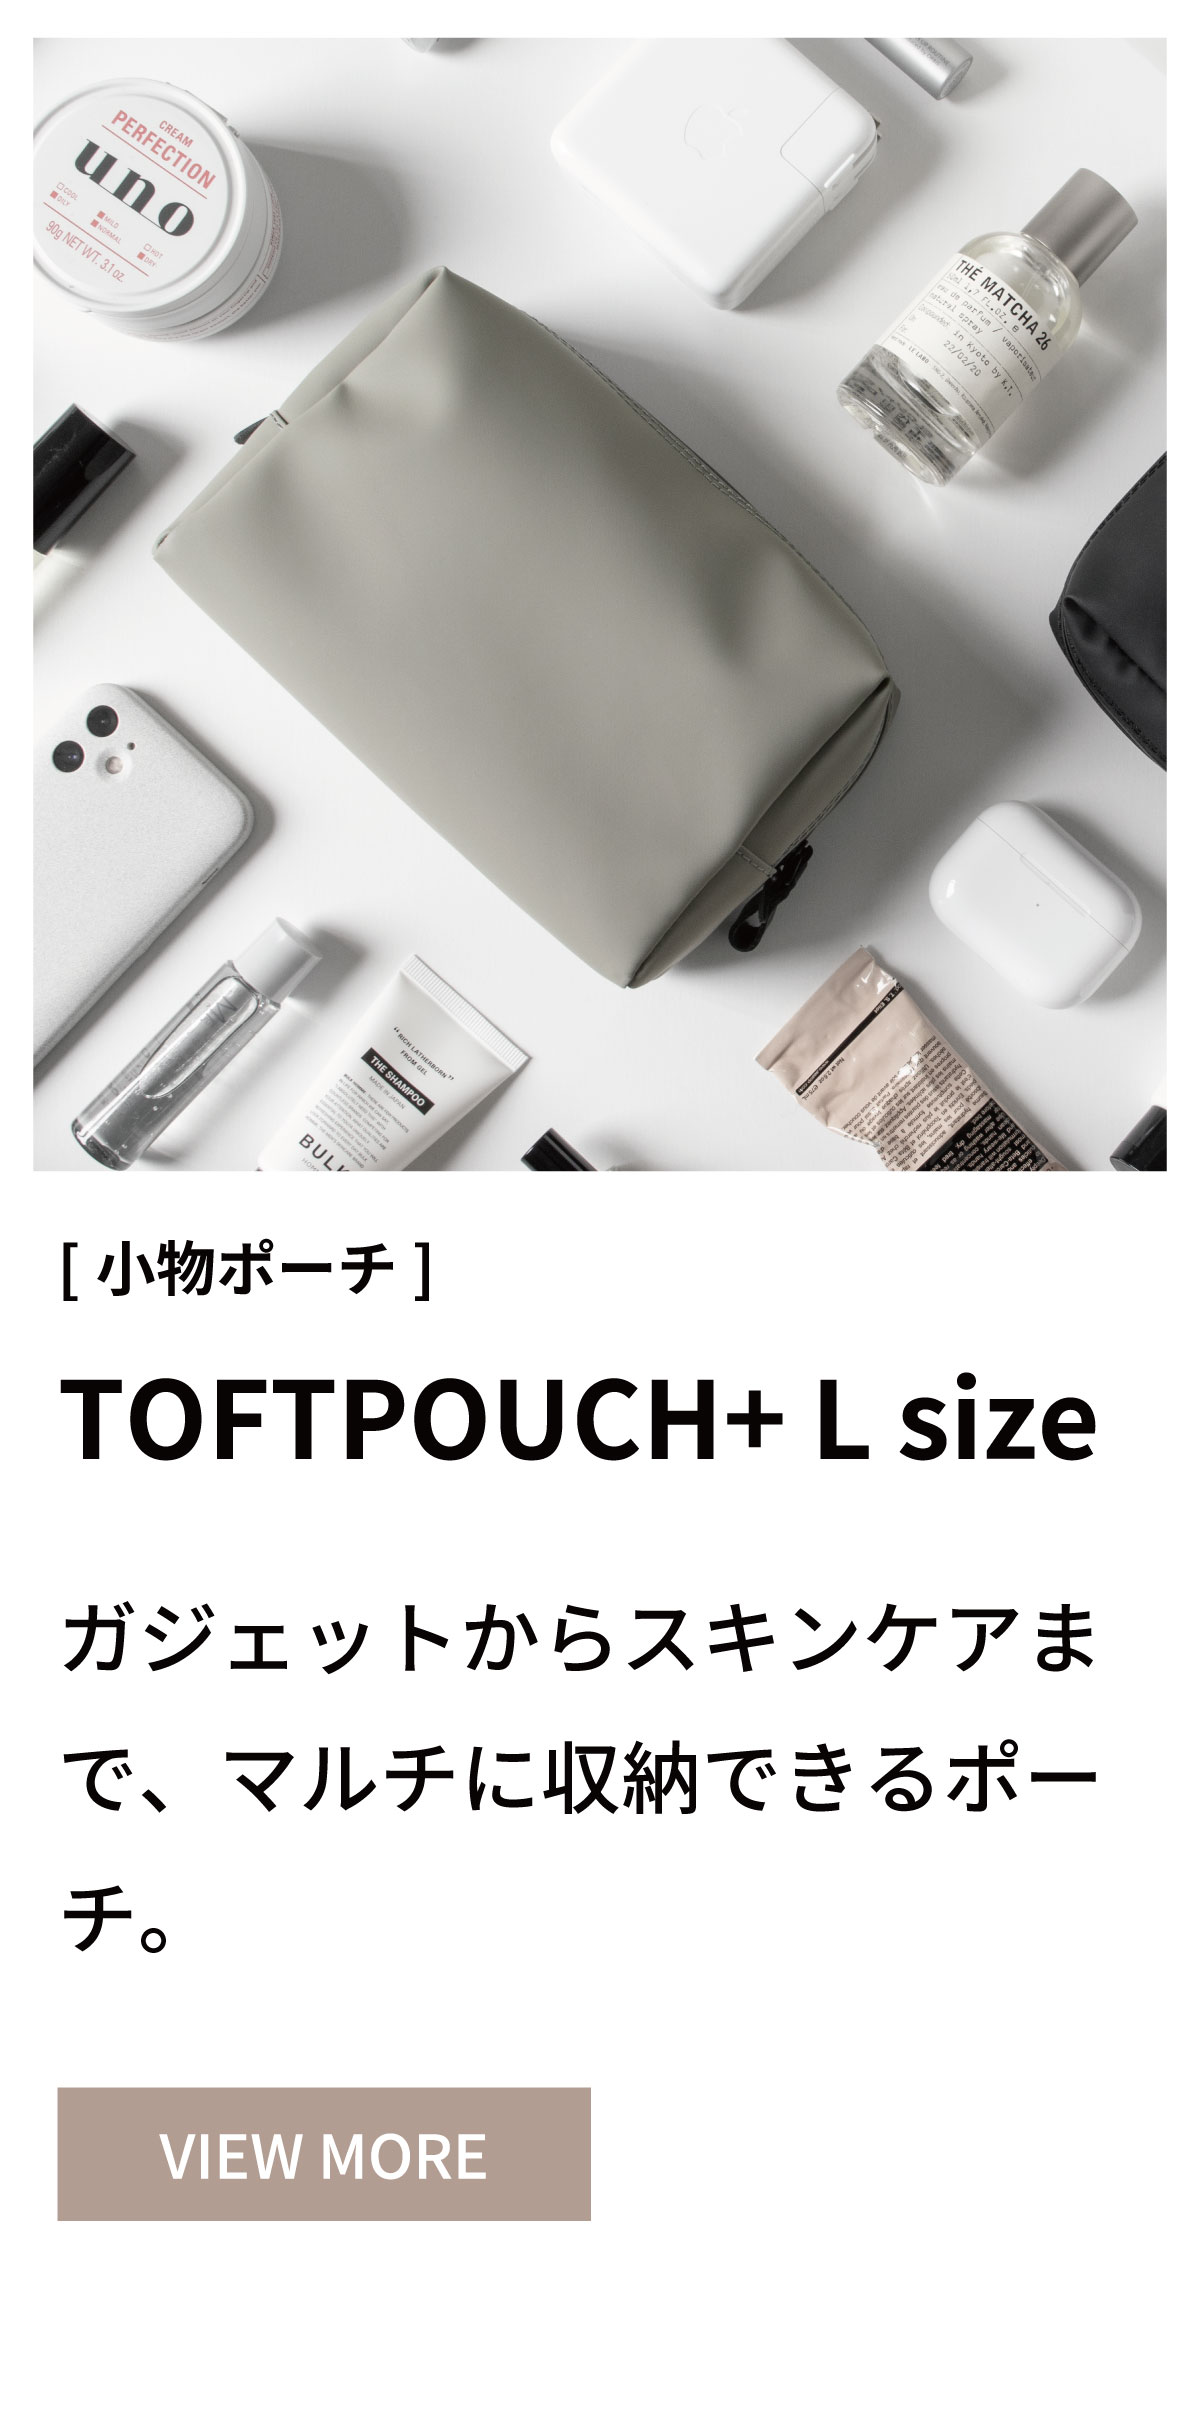 TOFTPOUCH + L size